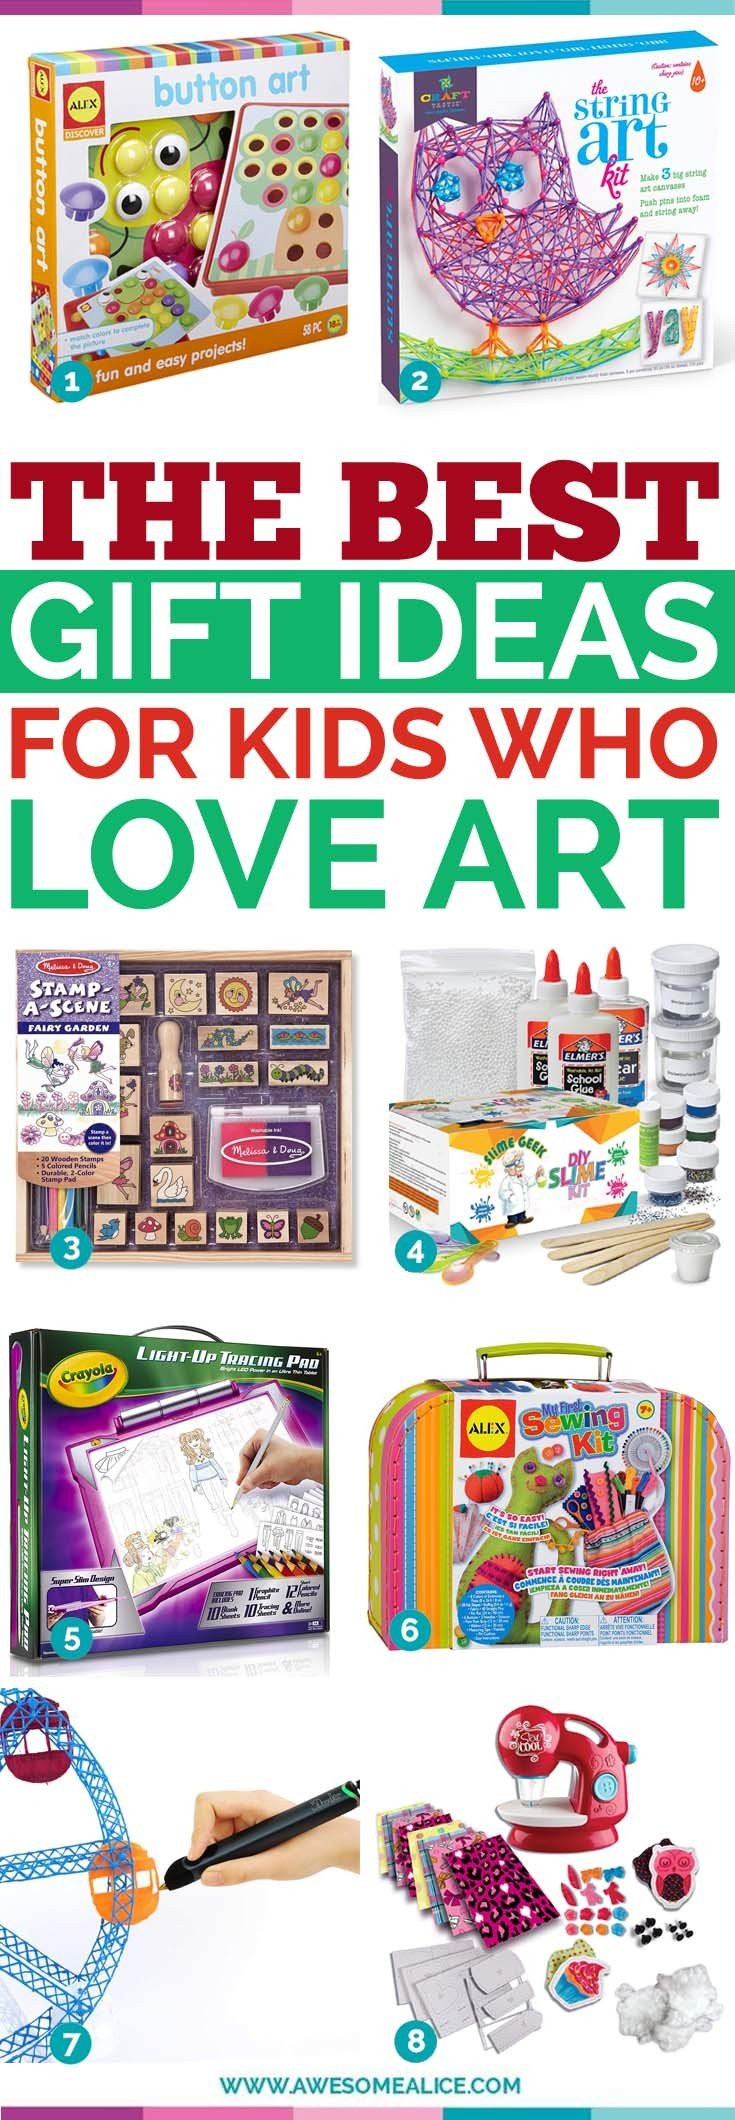 Creative Gifts For Children
 Top 30 Gift Ideas for Creative Kids Who Love Art